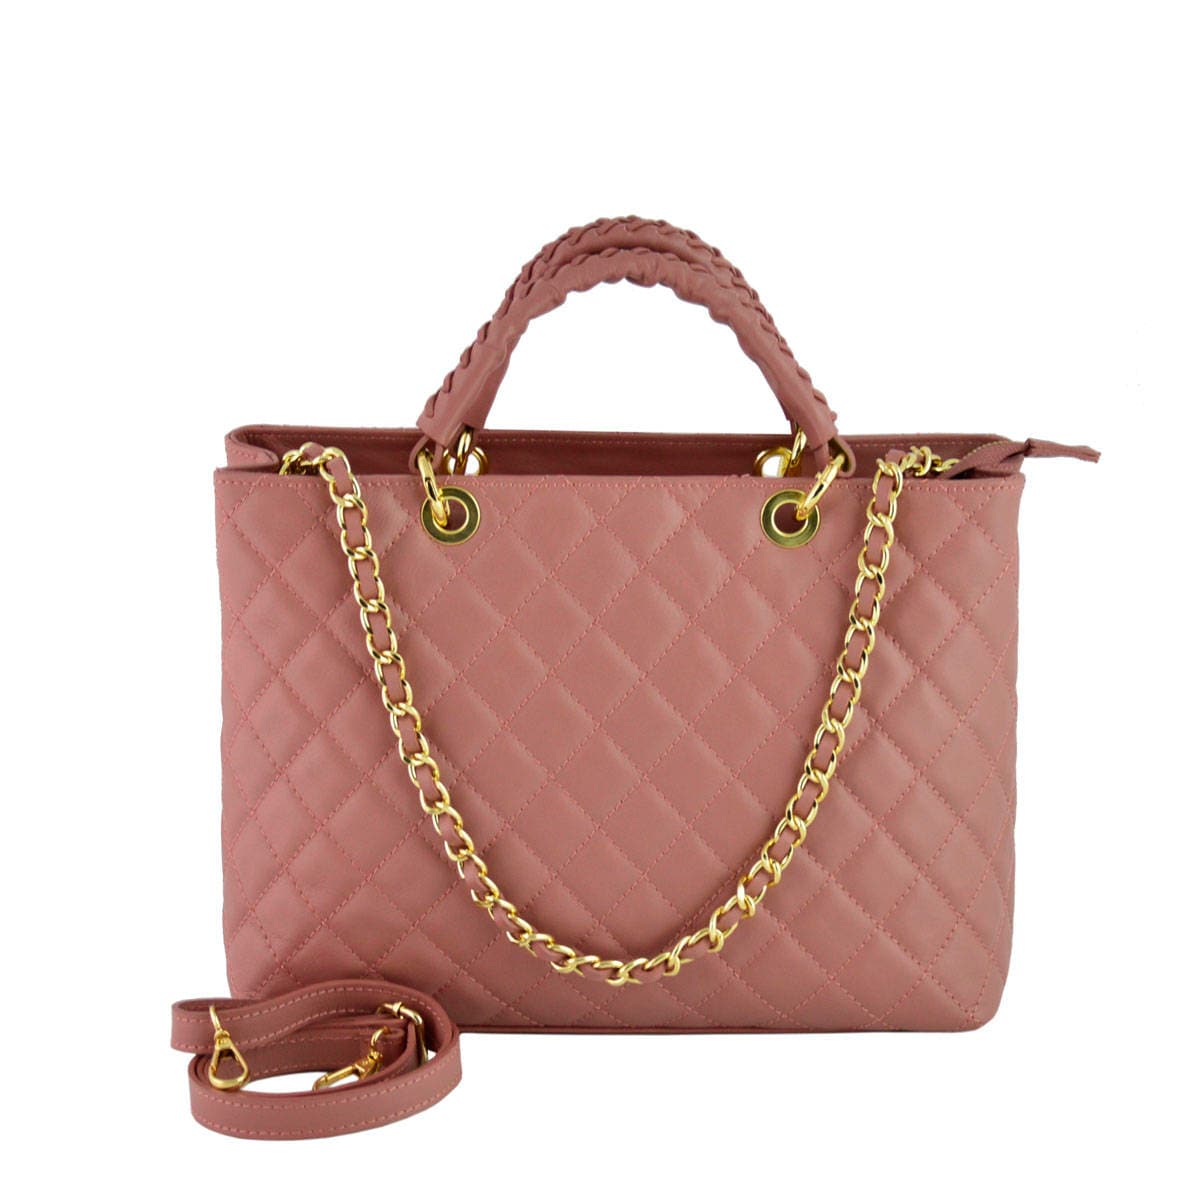 Genuine Quilted Leather Handbag